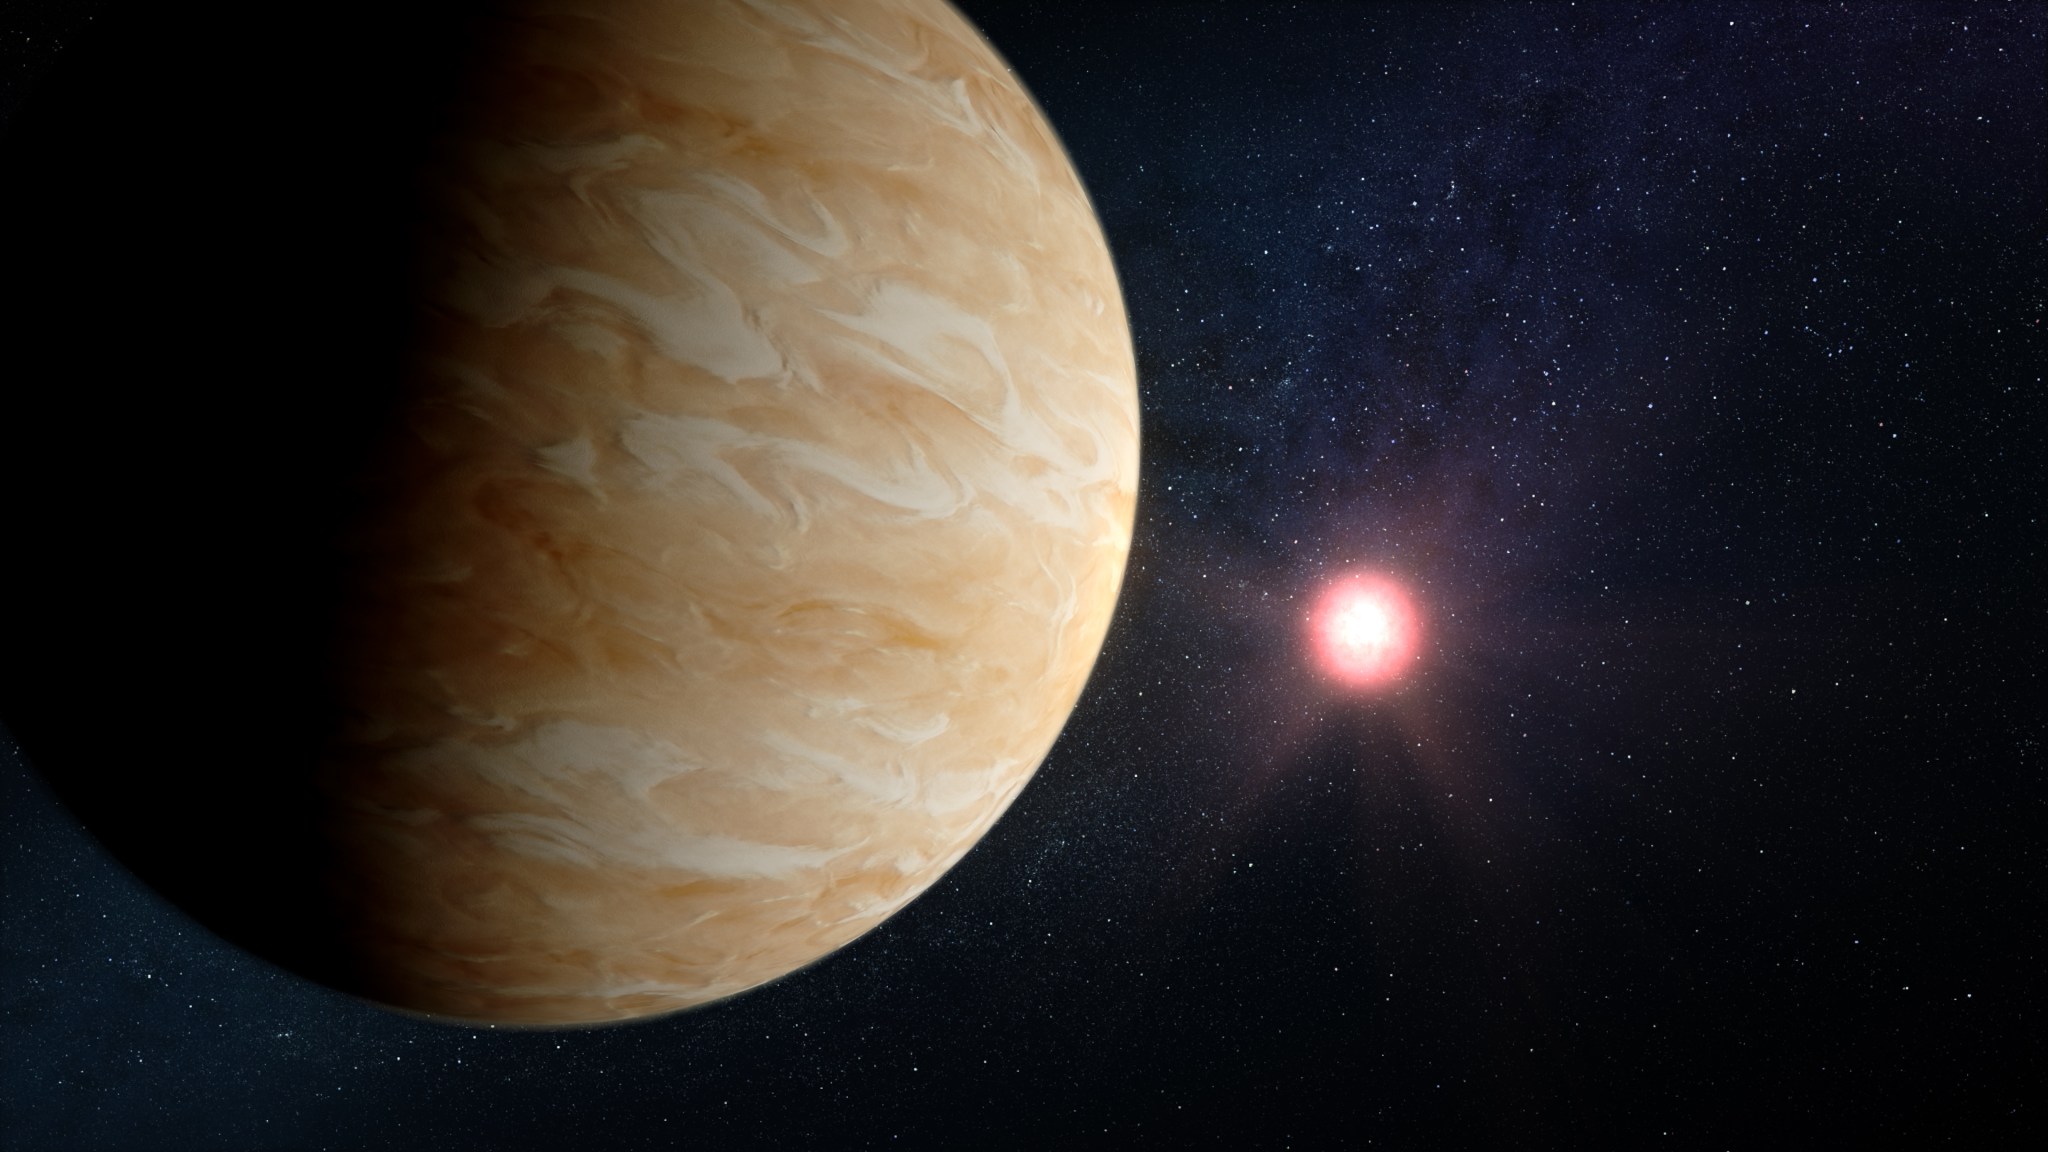 illustration of tan-hued planet illuminated by a white-red star, against the black backdrop of space